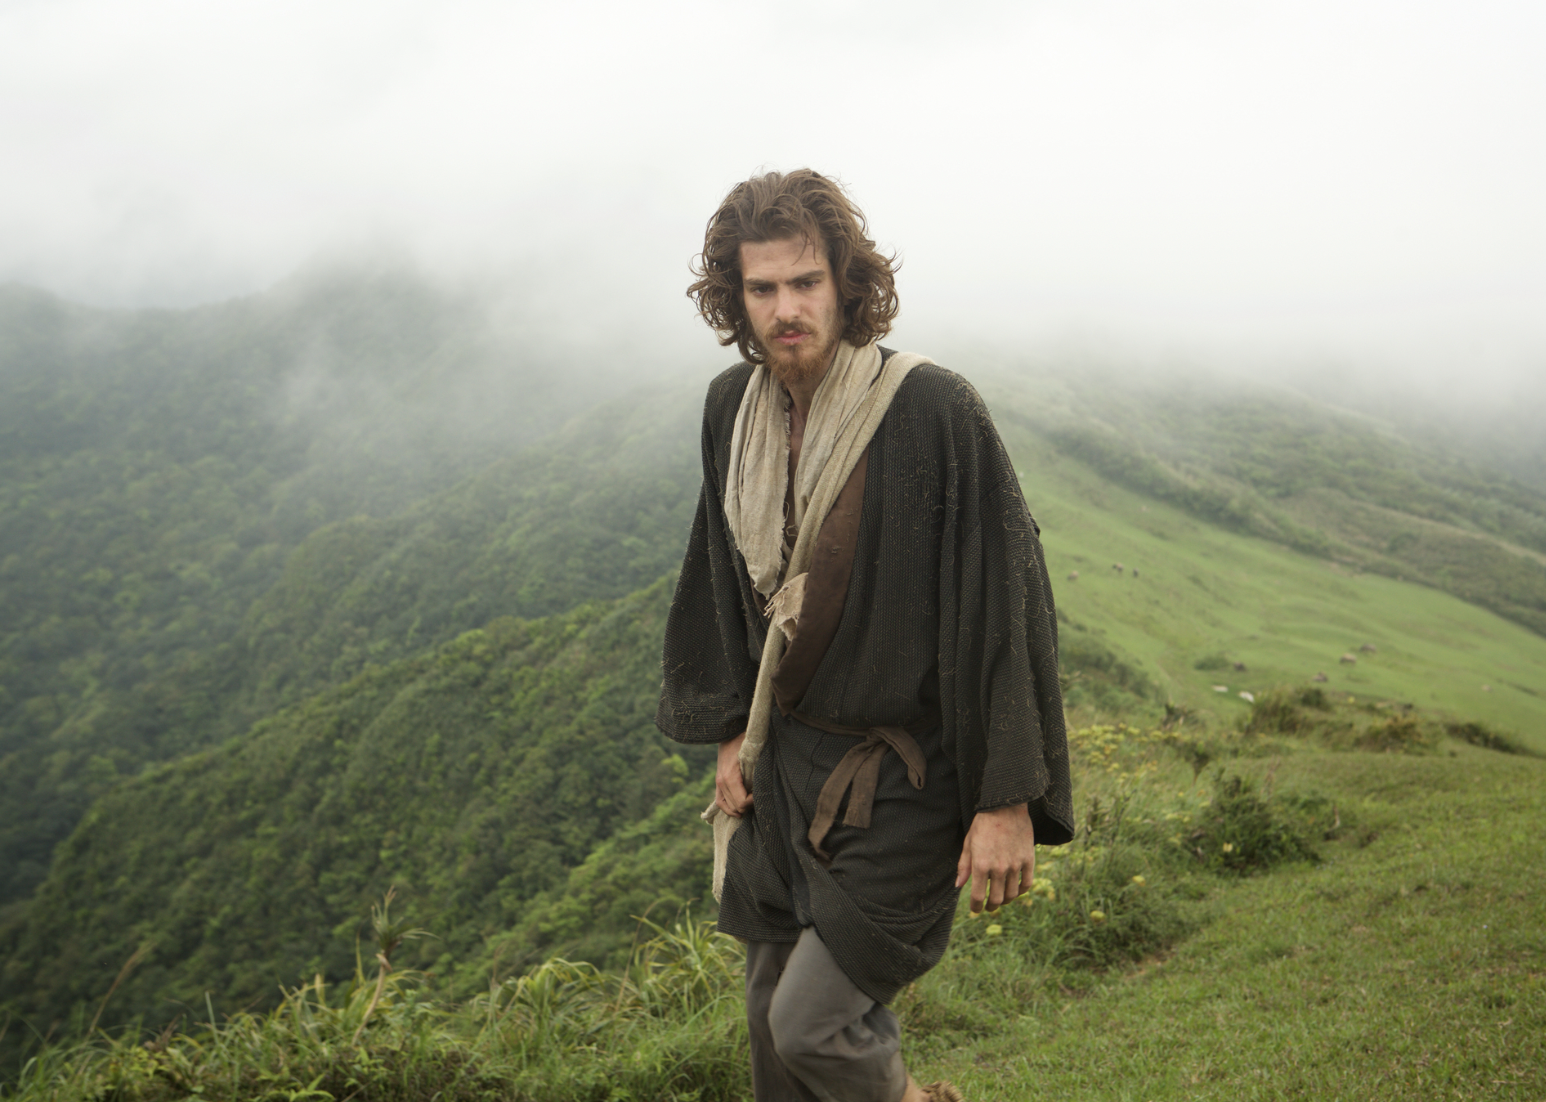 Andrew Garfield in "Silence"